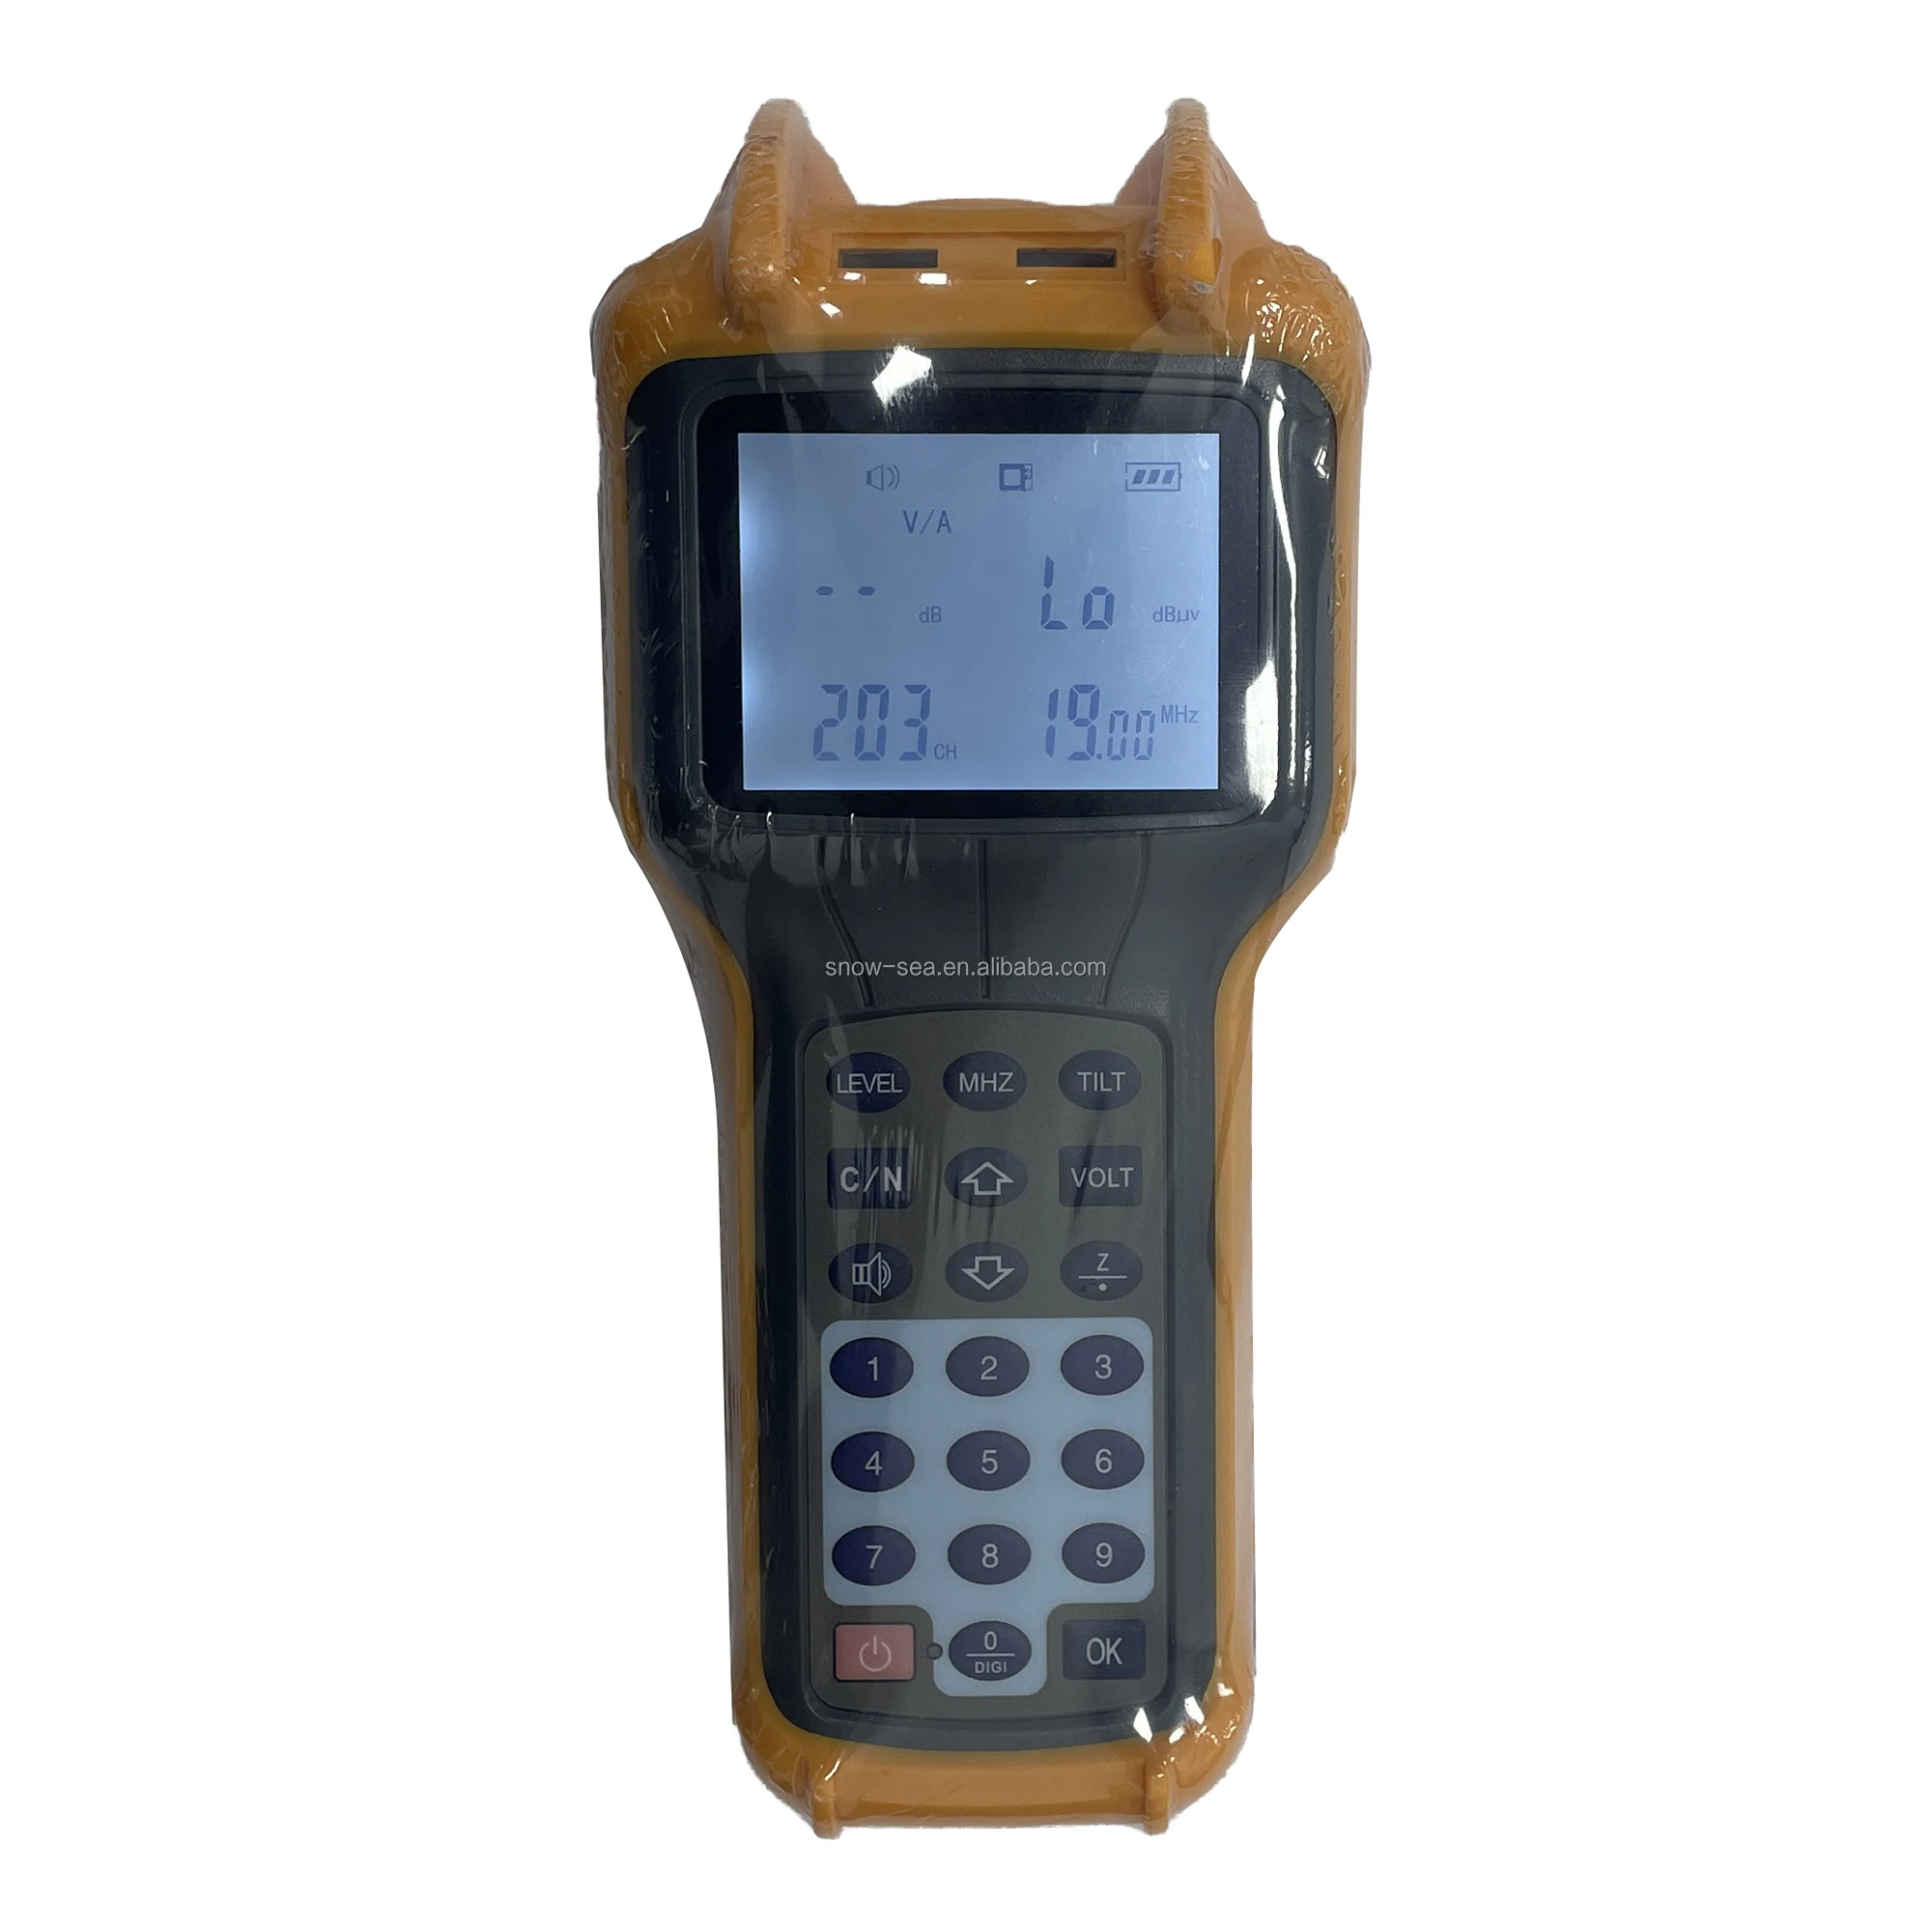 5-870MHz Handheld Analog Cable TV RF Signal Level Meter - Buy 5-870MHz  Handheld Analog Cable TV RF Signal Level Meter Product on